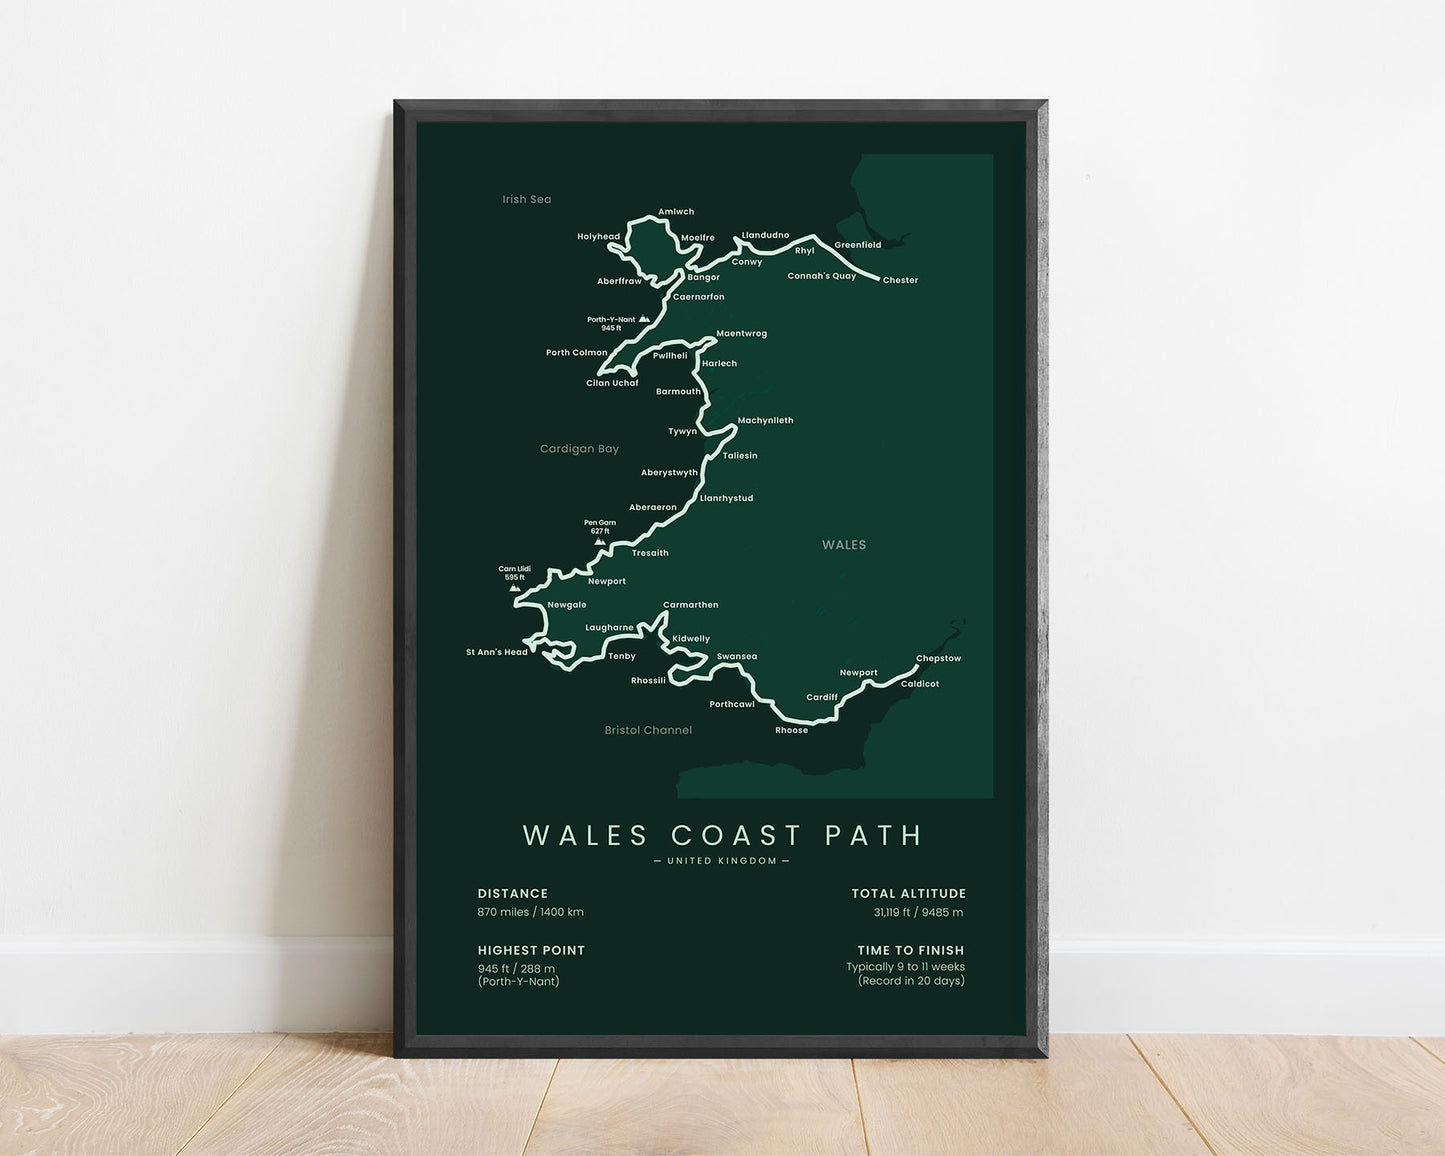 Wales Coast Path (North Wales Path) path art print with green background